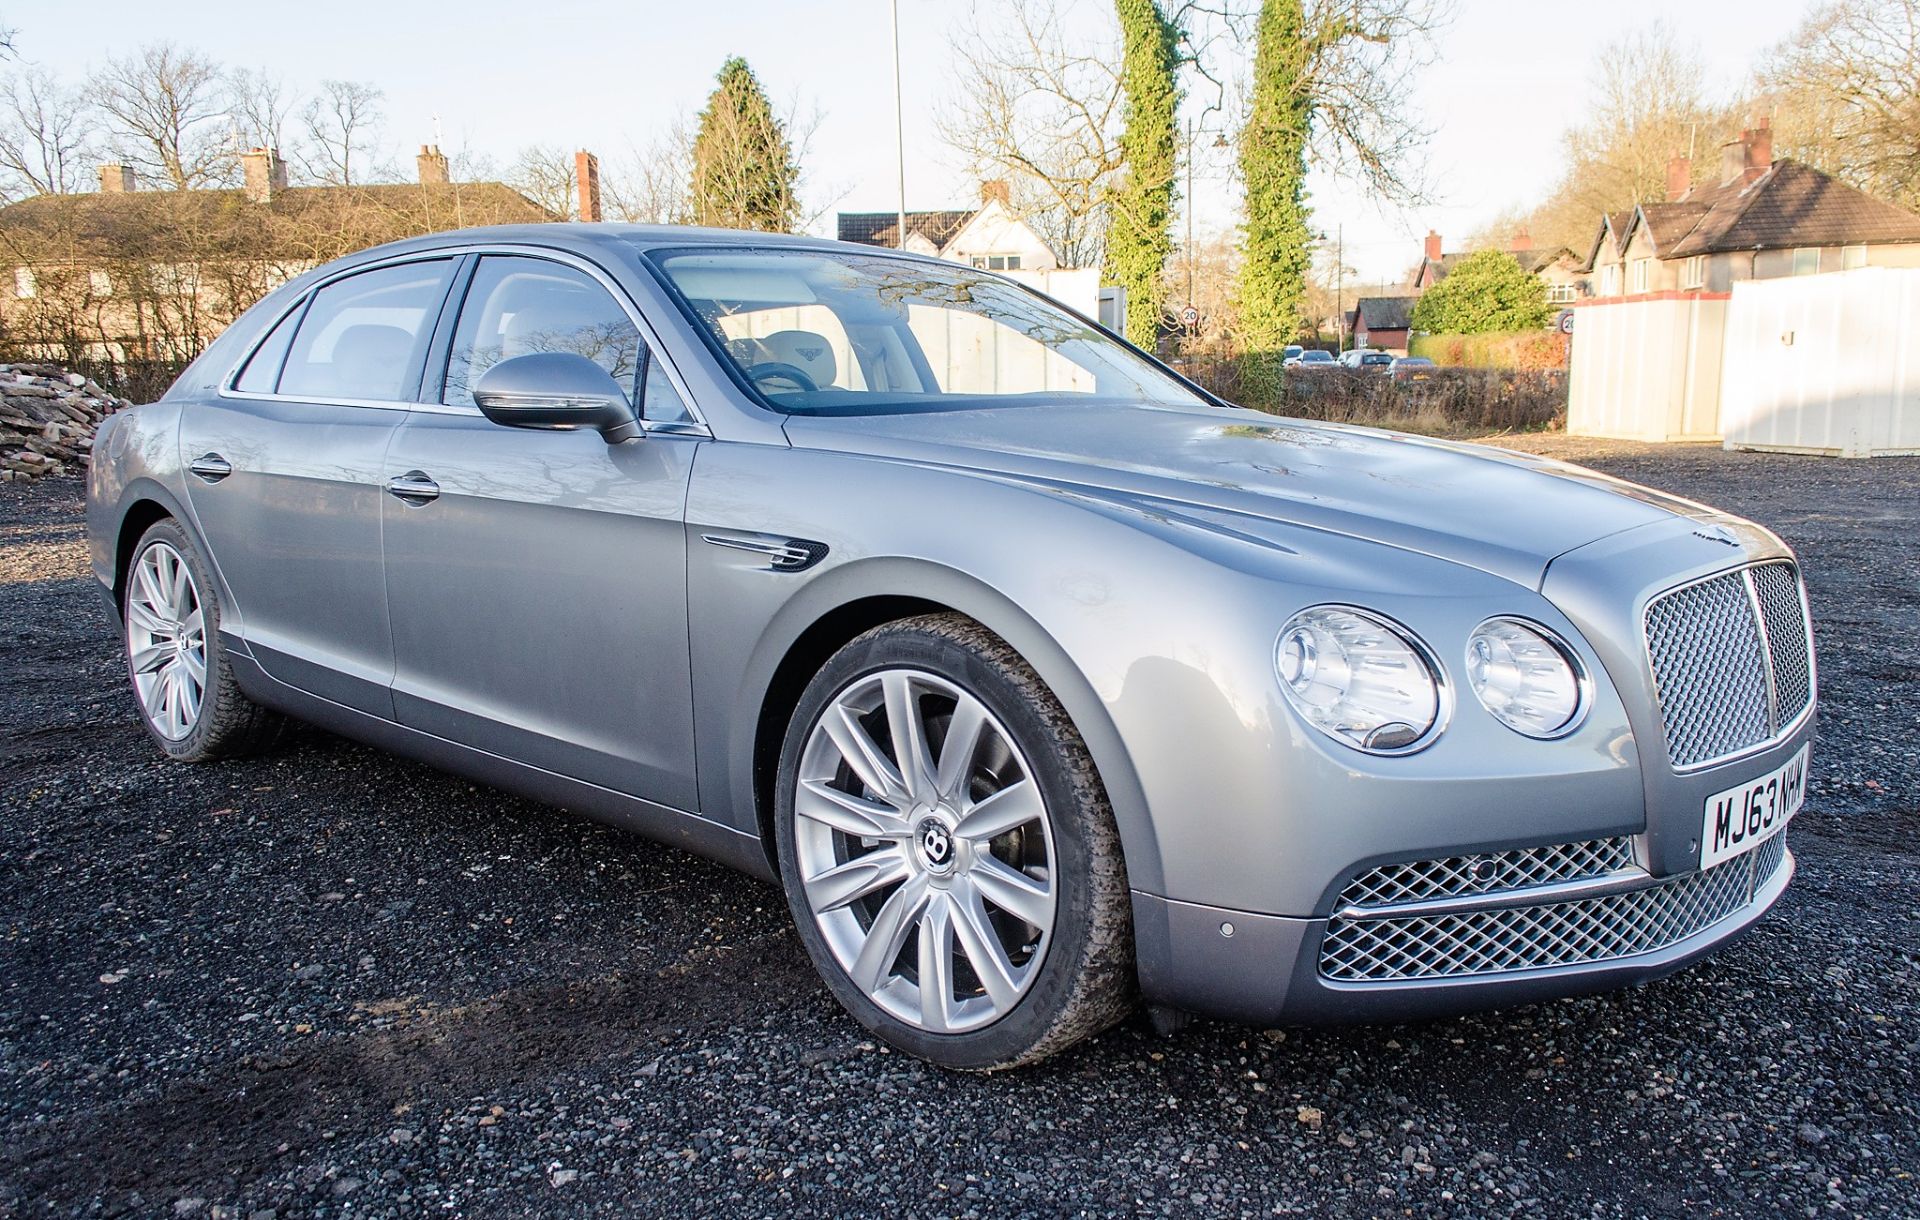 Bentley Flying Spur 6.0 W12 automatic 4 door saloon car Registration Number: MJ63 NHM Date of - Image 2 of 51